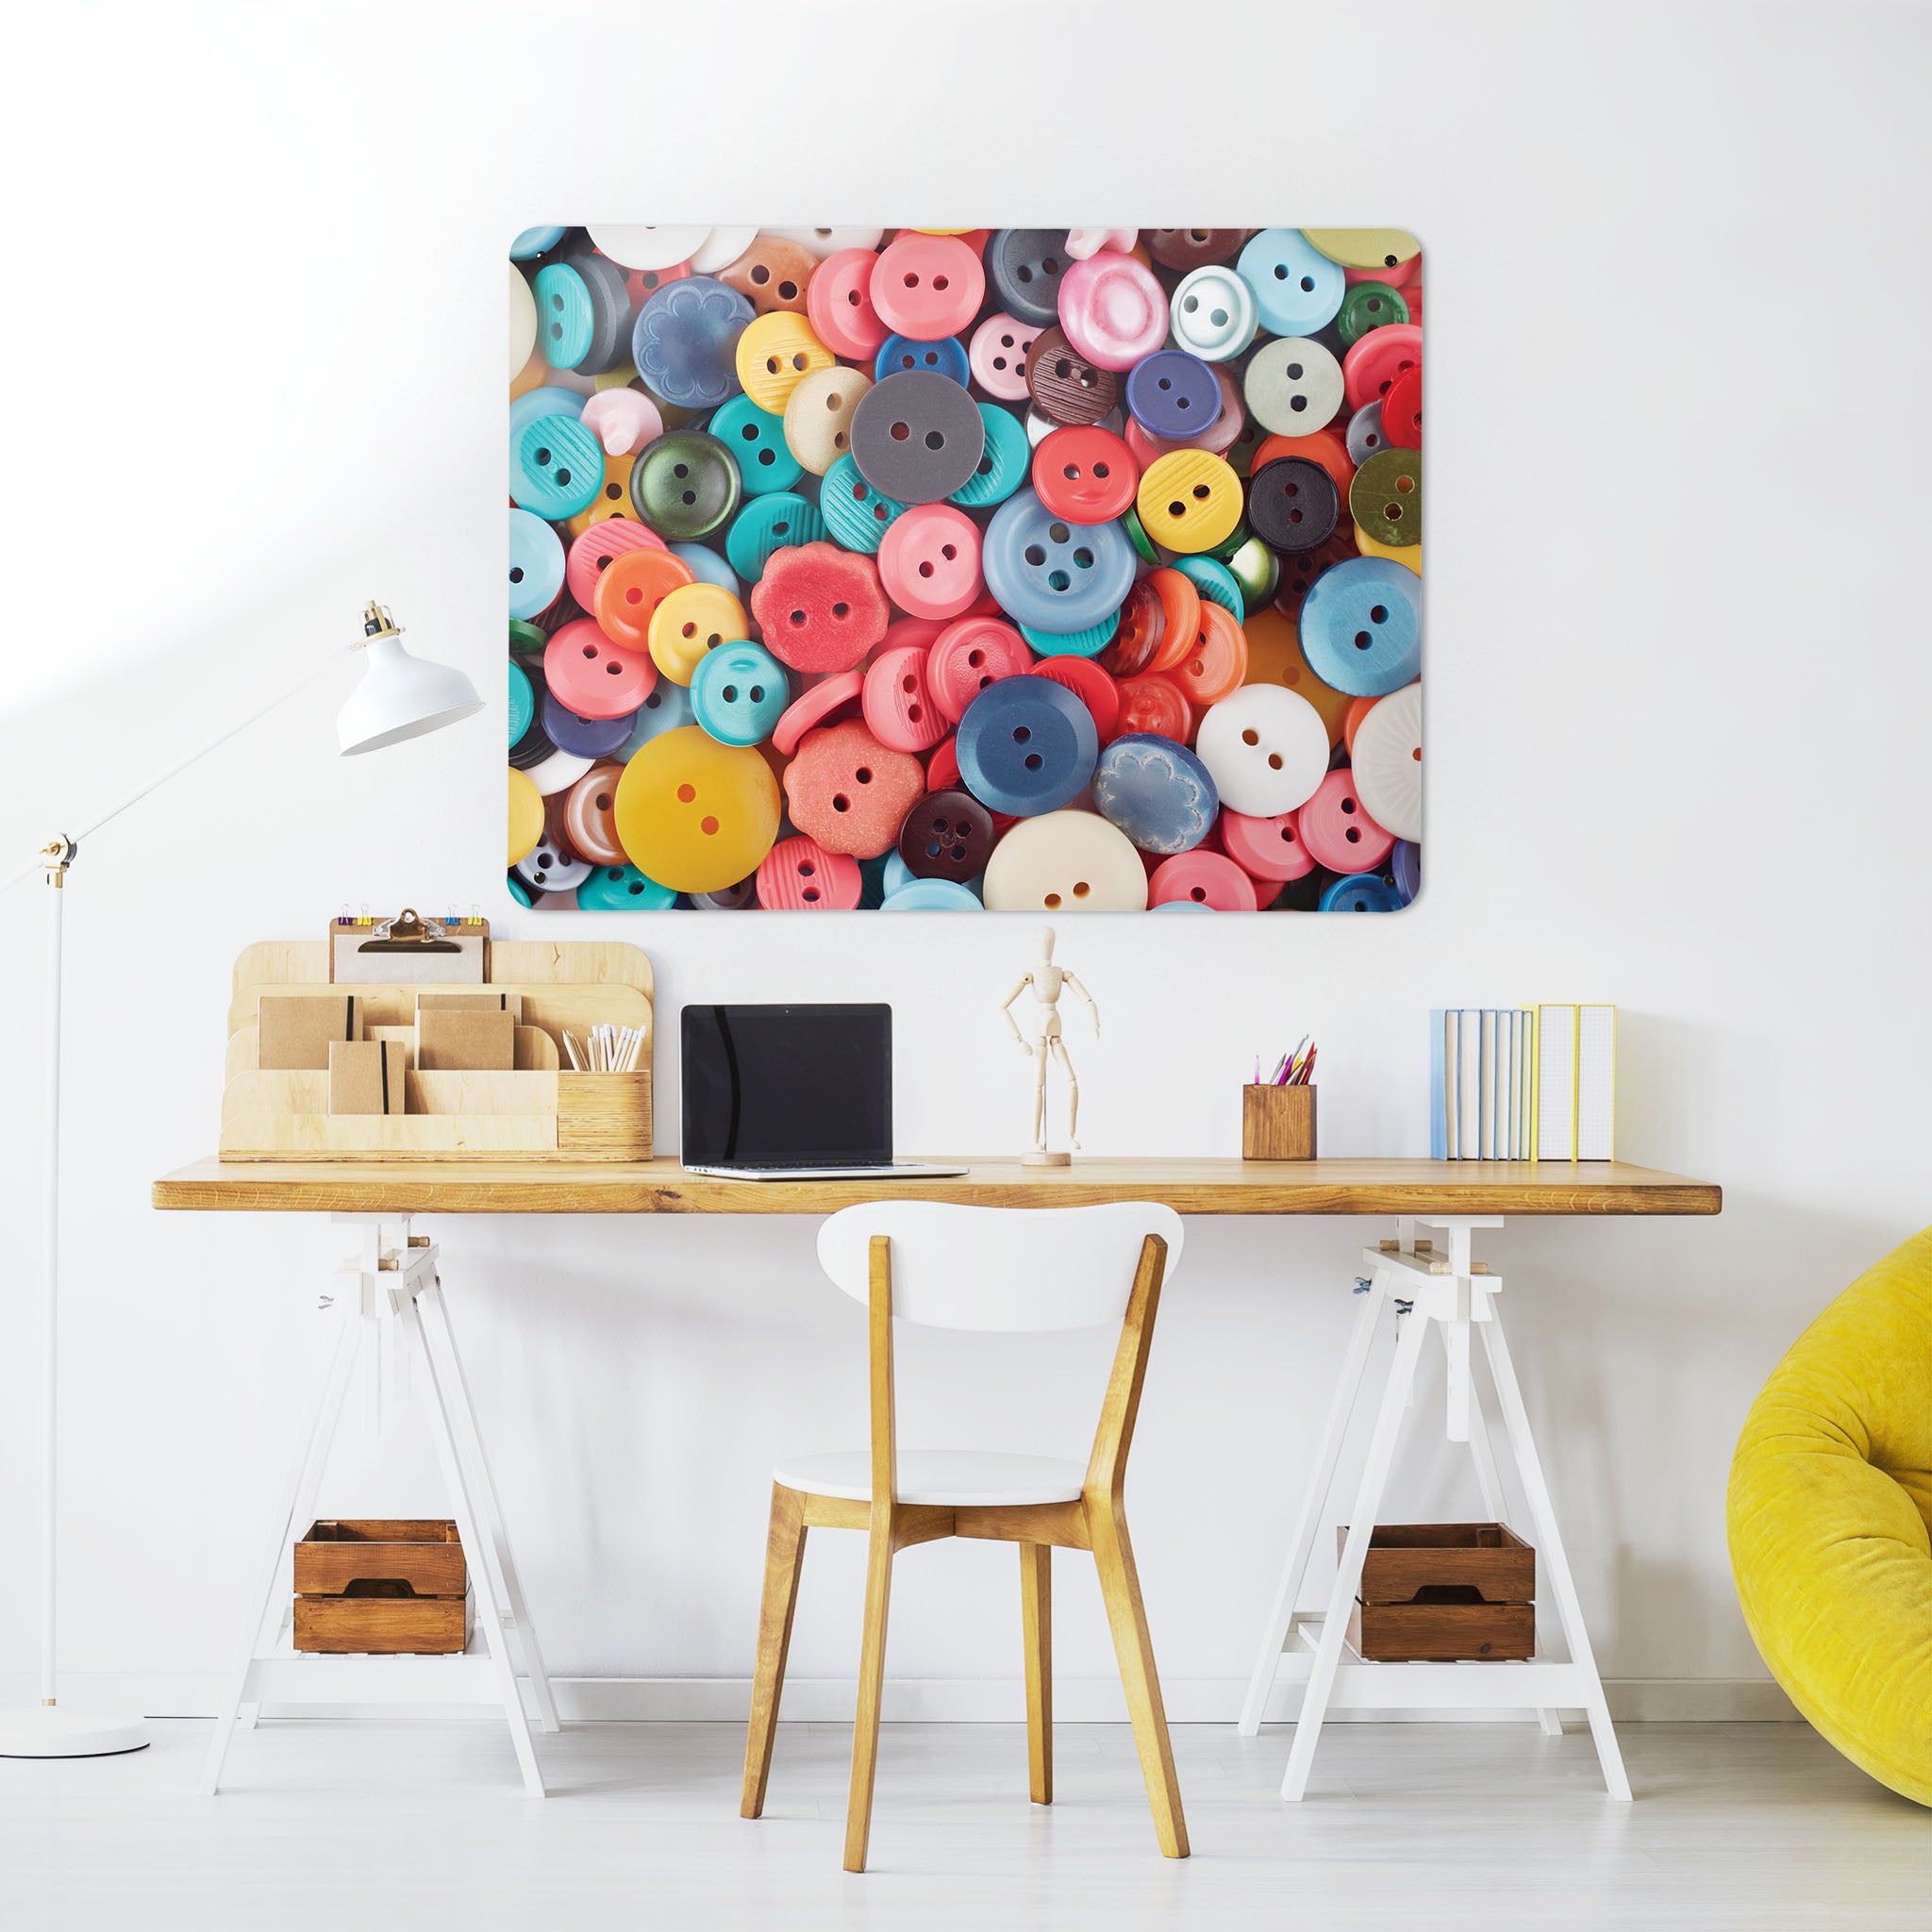 A desk in a workspace setting in a white interior with a magnetic metal wall art panel showing a colourful array of buttons